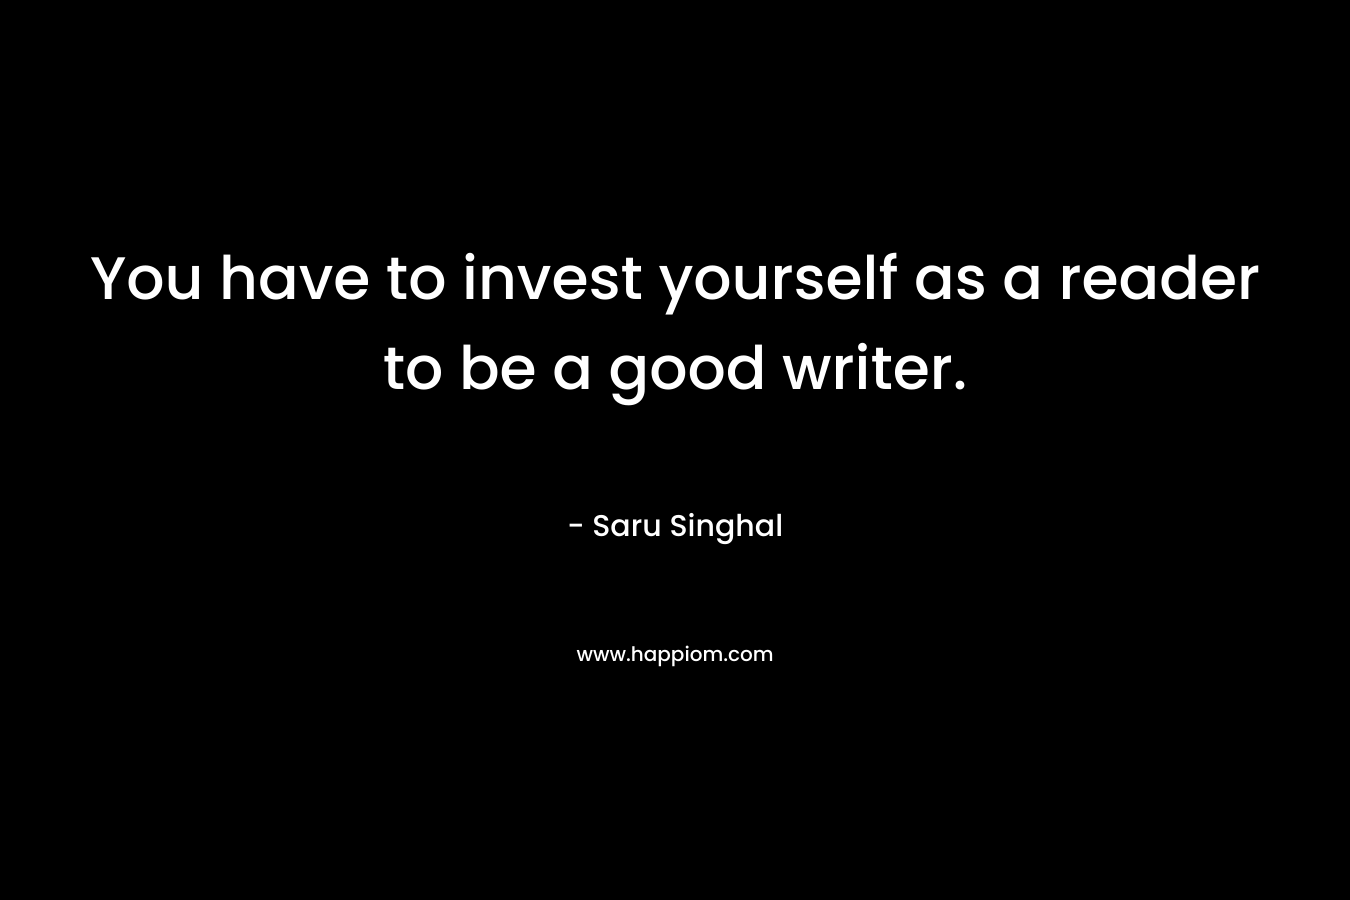 You have to invest yourself as a reader to be a good writer. – Saru Singhal